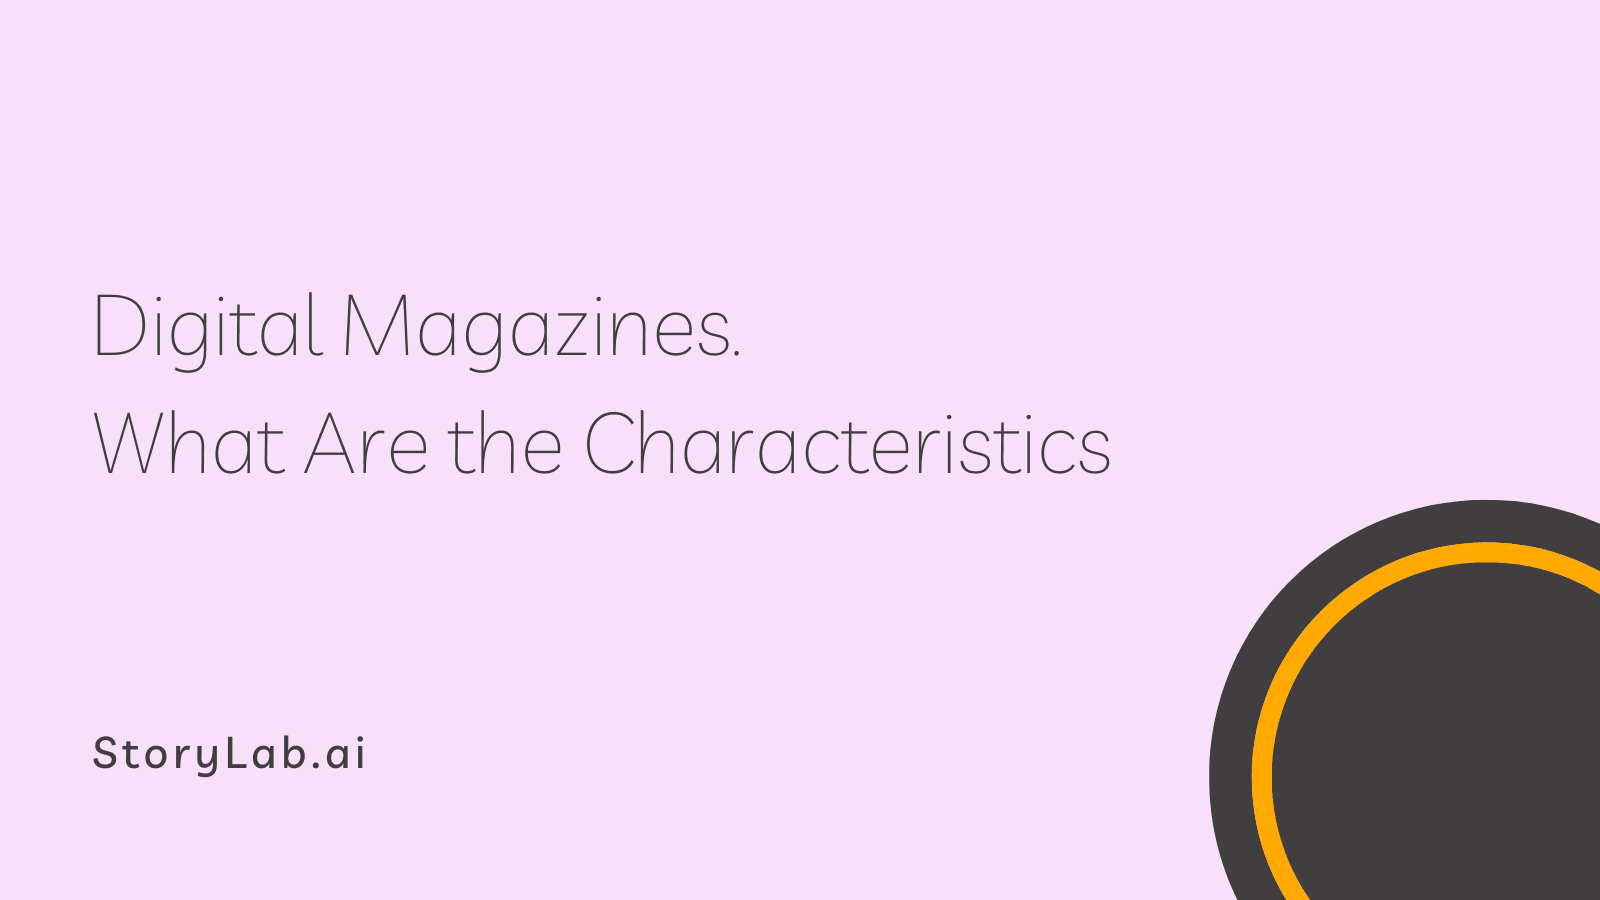 Digital Magazines. What Are the Characteristics